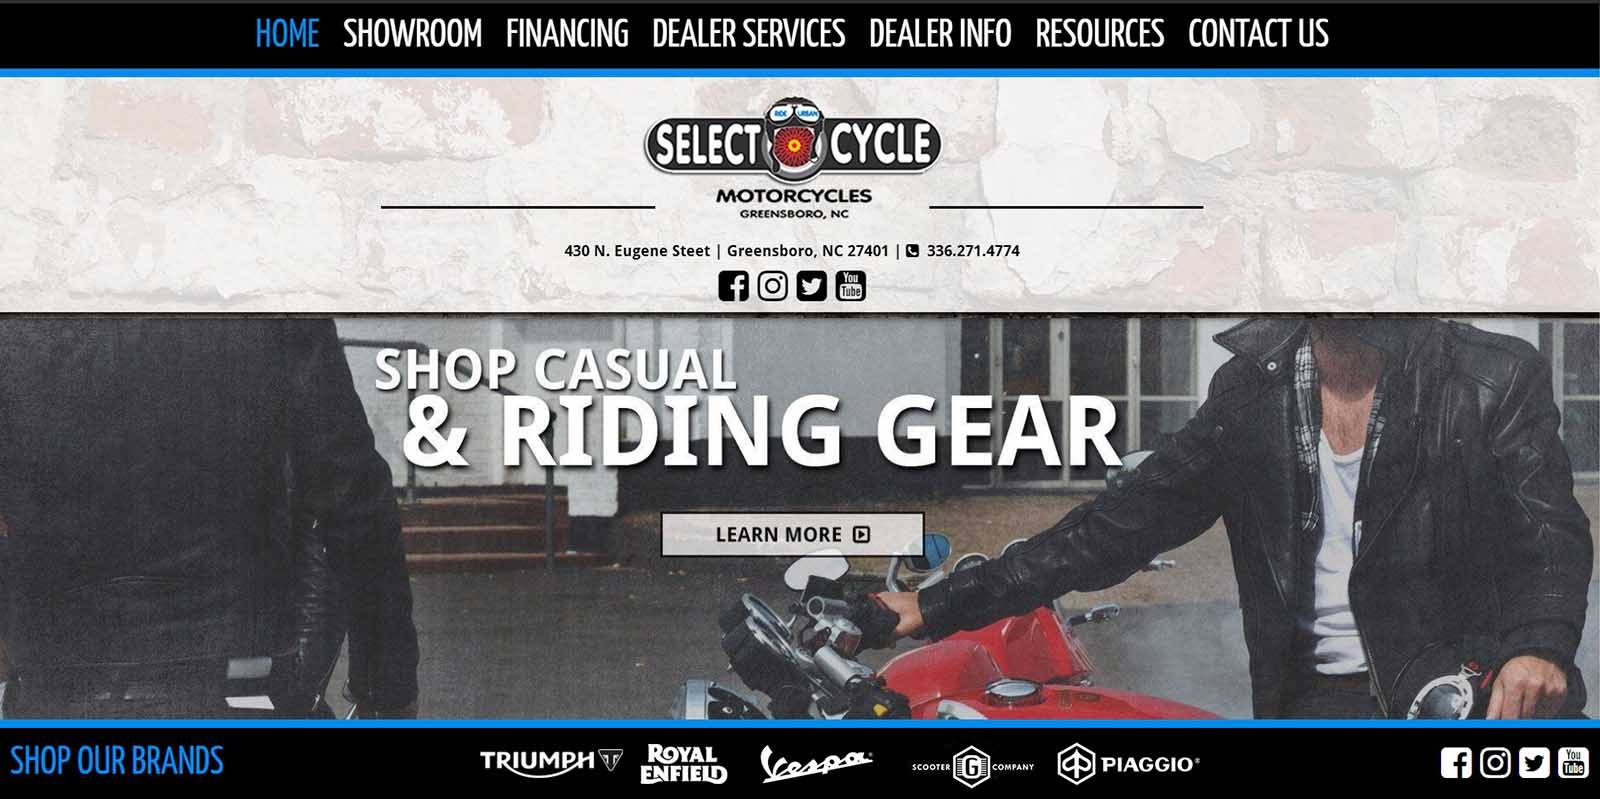 Clothing select service